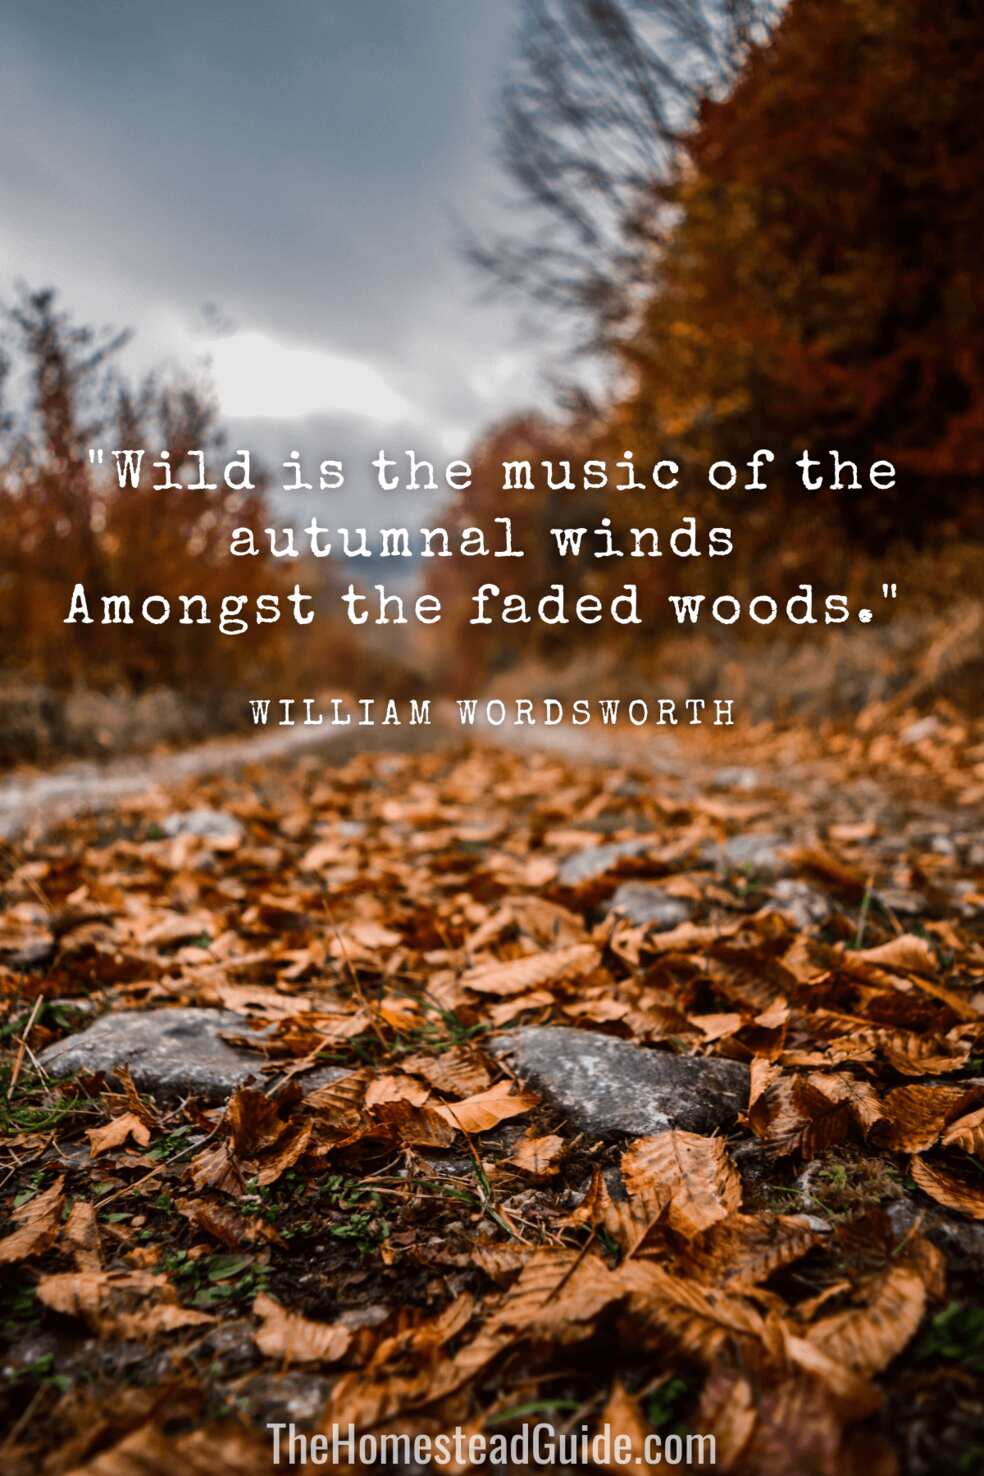 Wild is the music of the autumnal winds Amongst the faded woods.